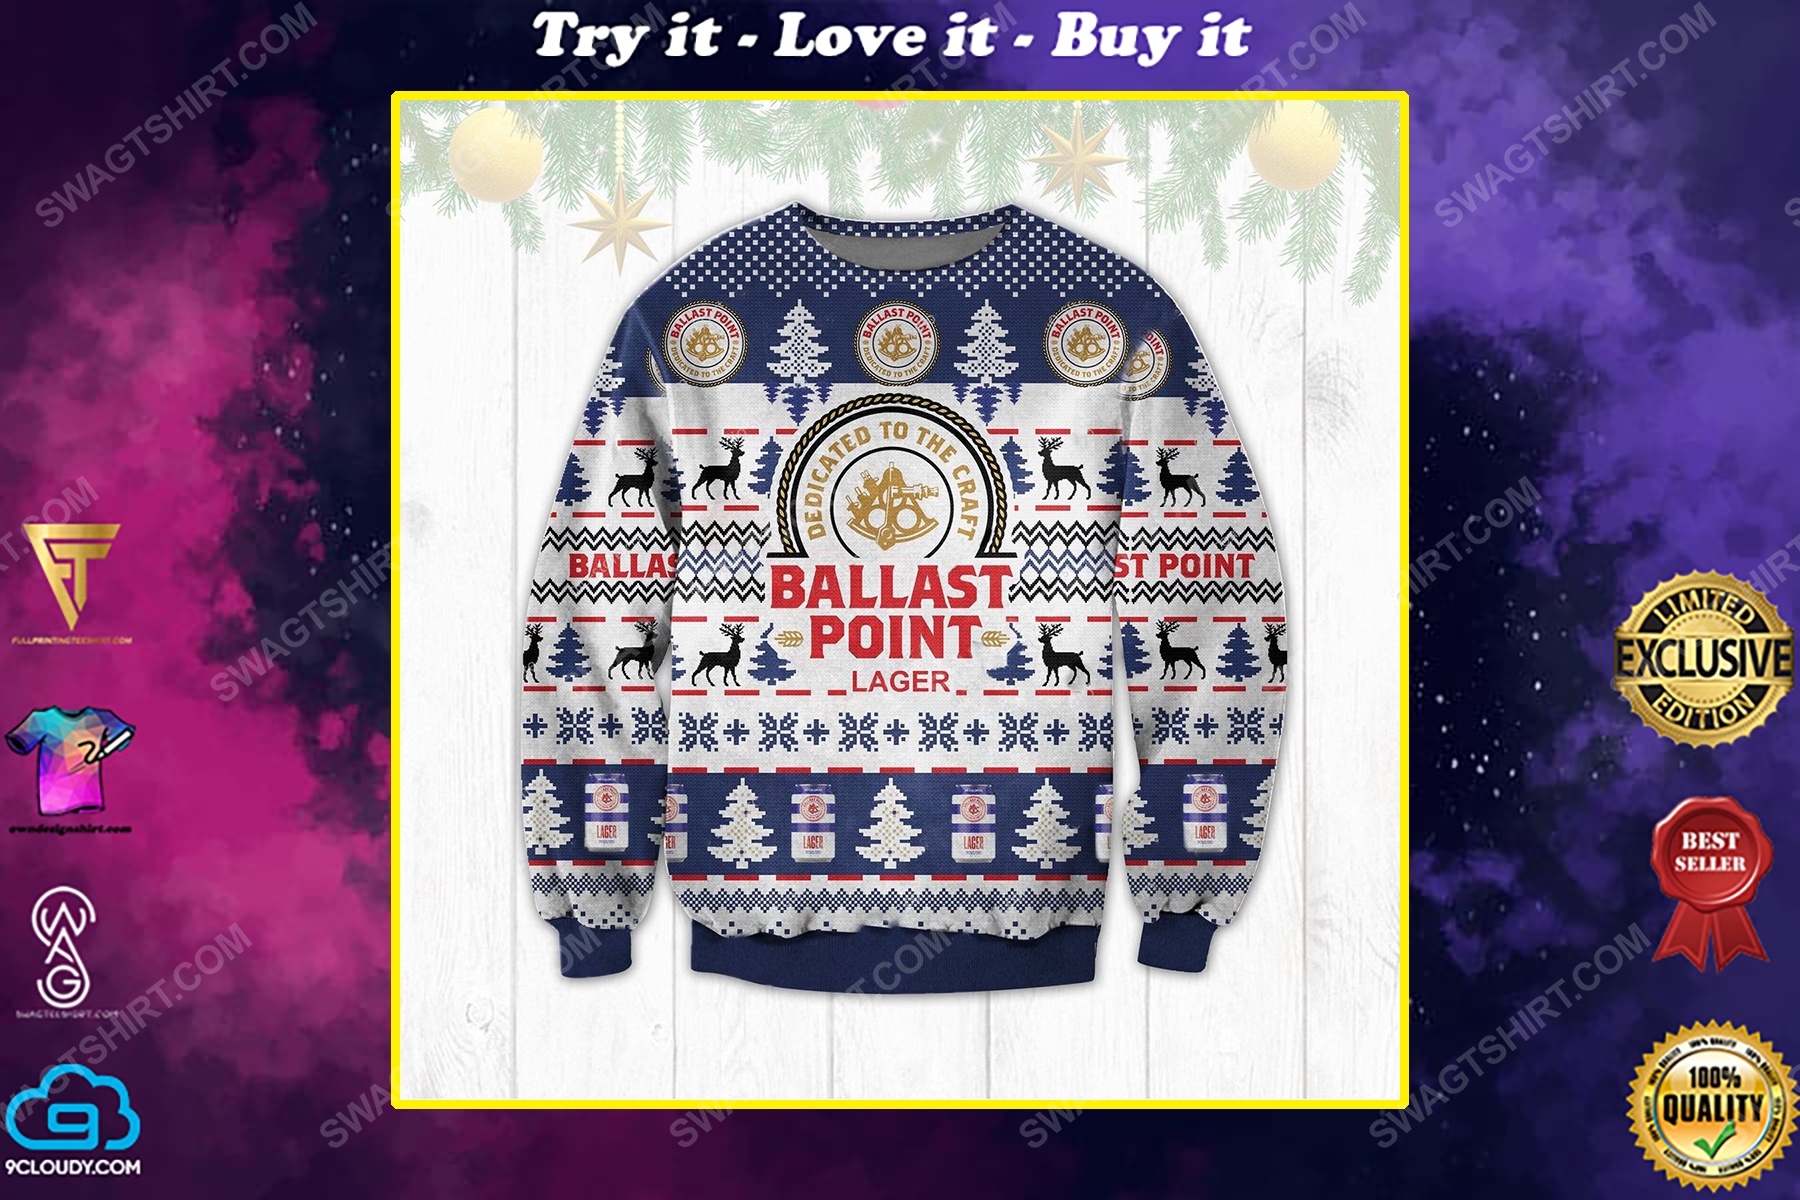 Ballast point lager beer ugly christmas sweater